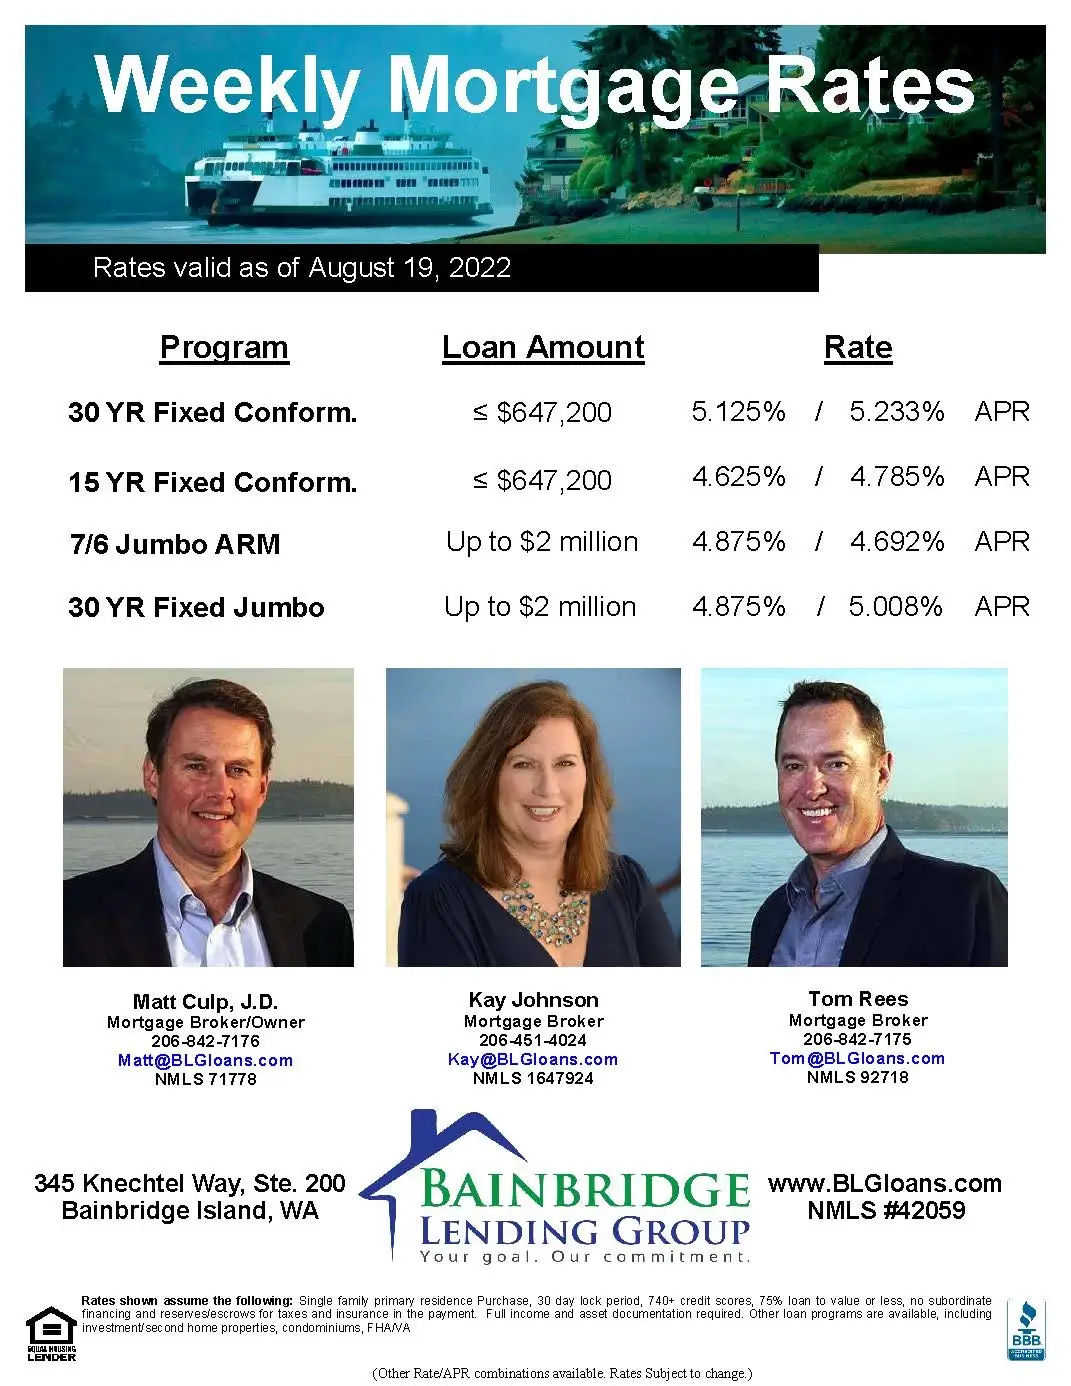 Weekly Rate Update for August 19, 2022